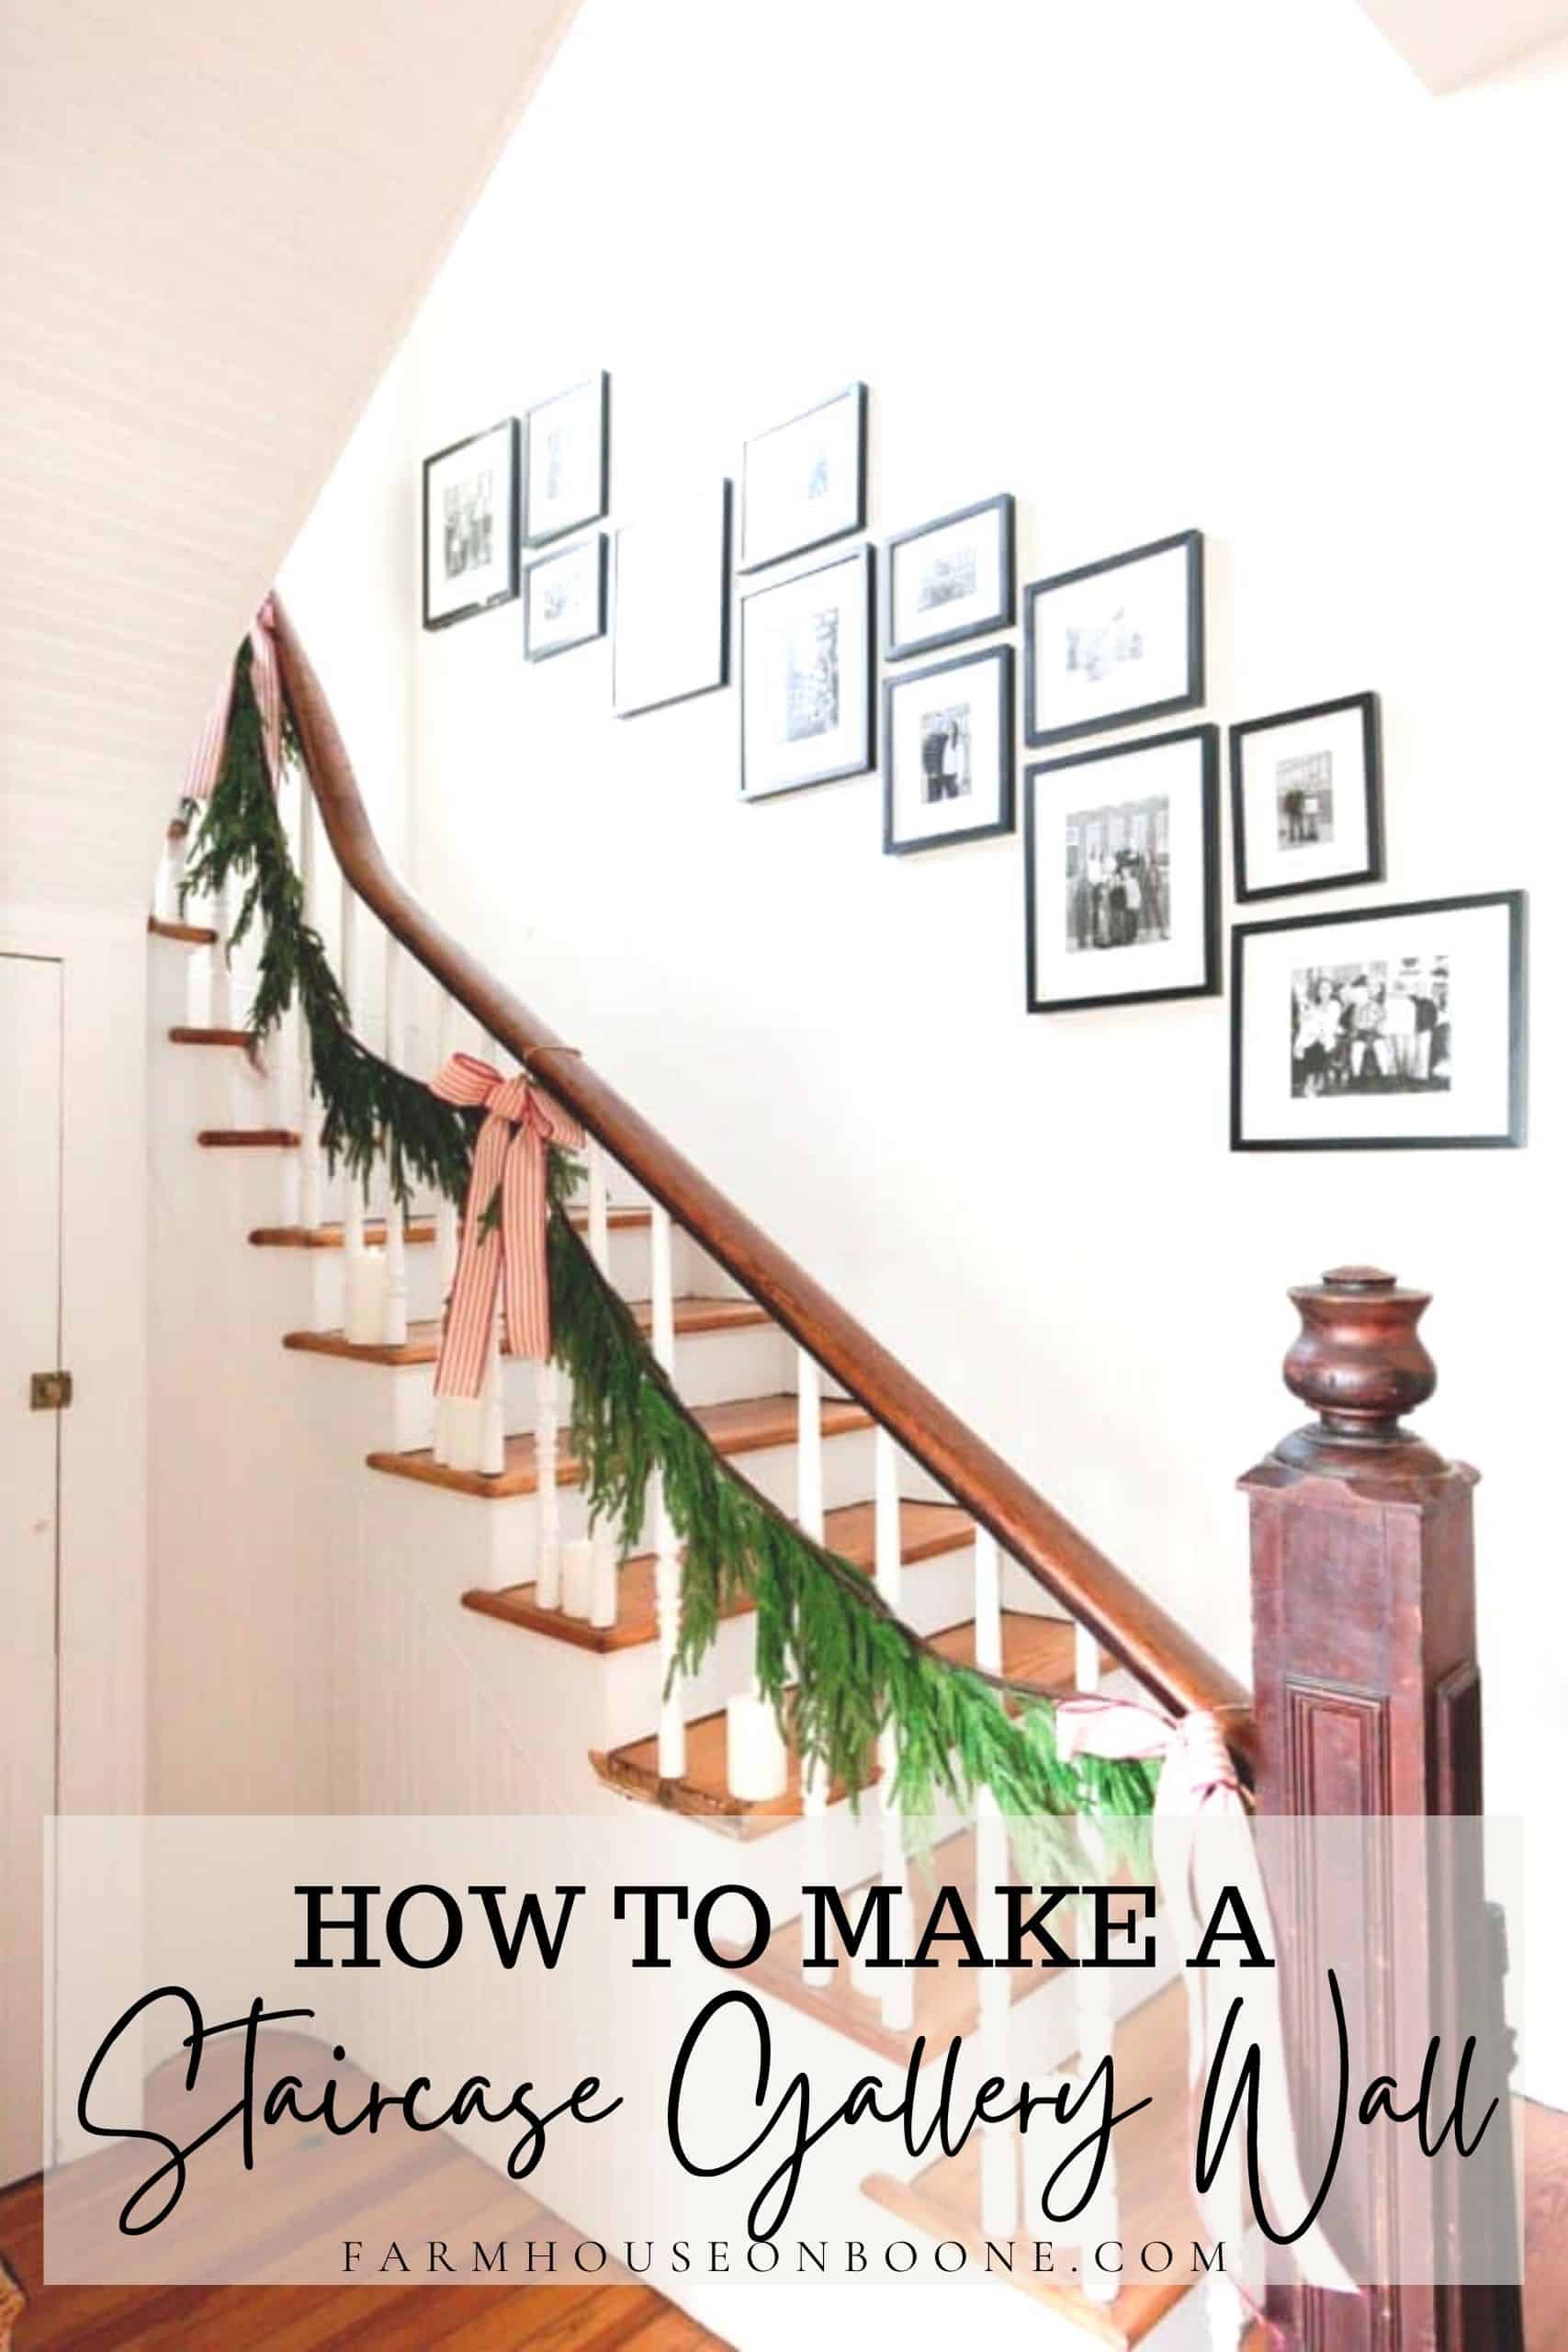 https://www.farmhouseonboone.com/wp-content/uploads/2021/12/how-to-make-a-staircase-gallery-wall.jpg